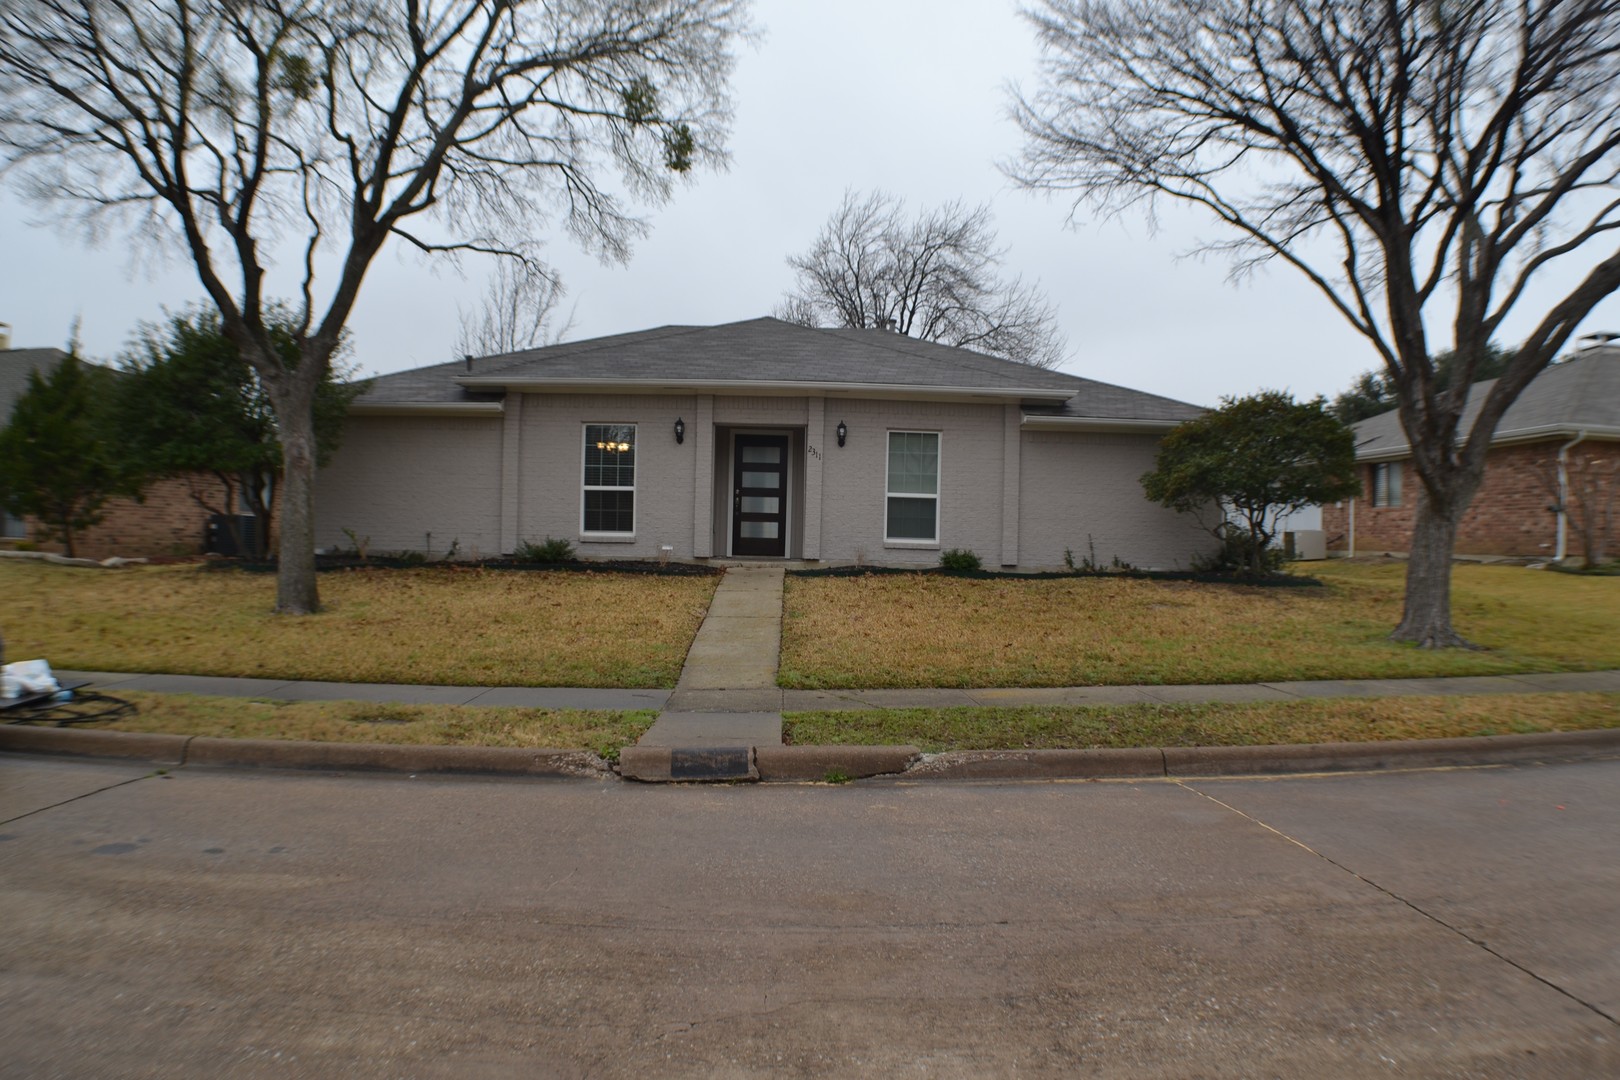 House For Lease in Carrollton